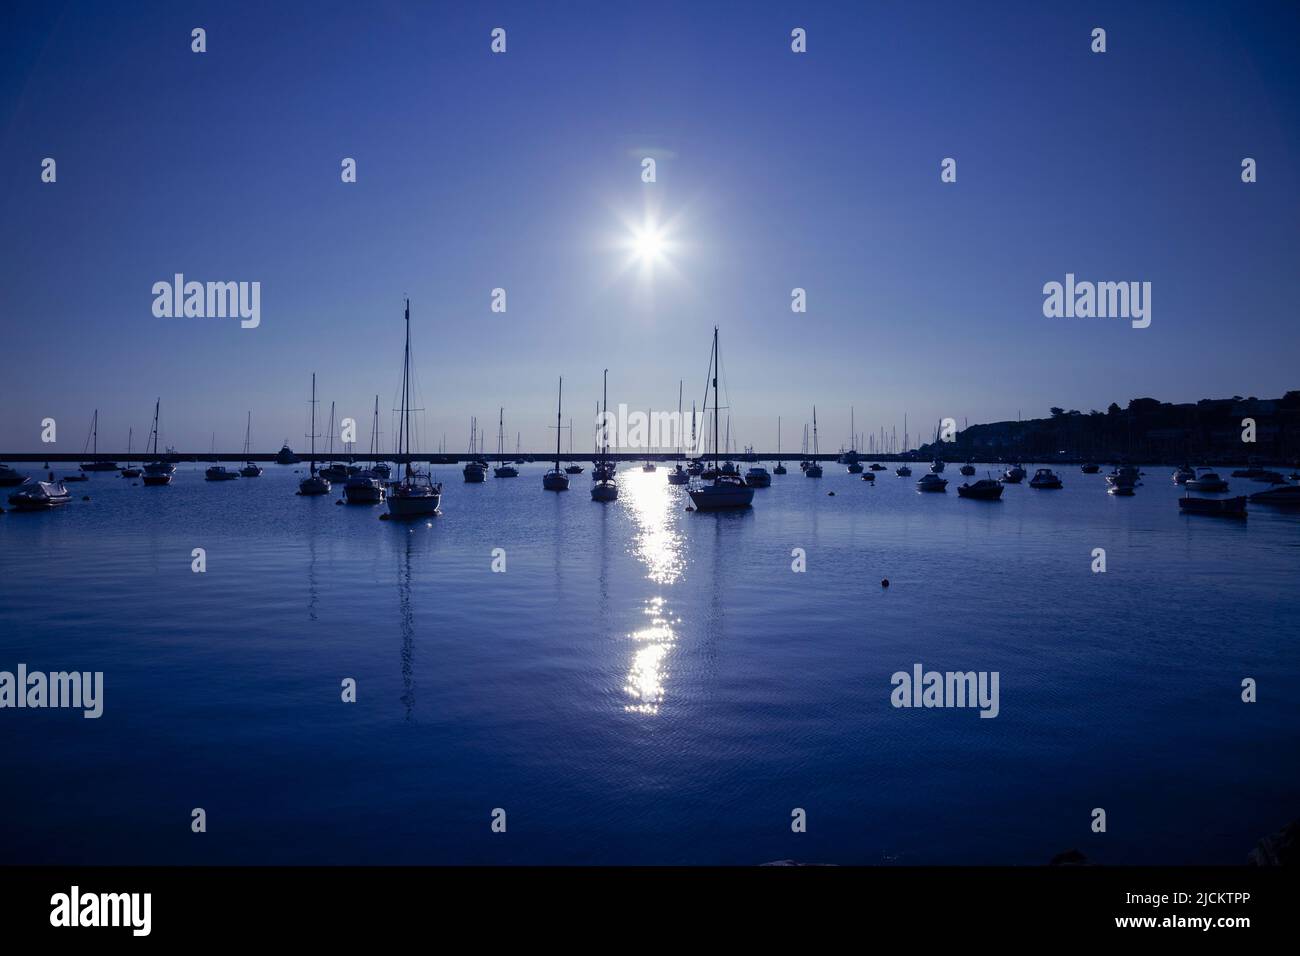 UK, England, Devon, Torbay, Brixham Harbour with moored Yachts at Dawn Stock Photo